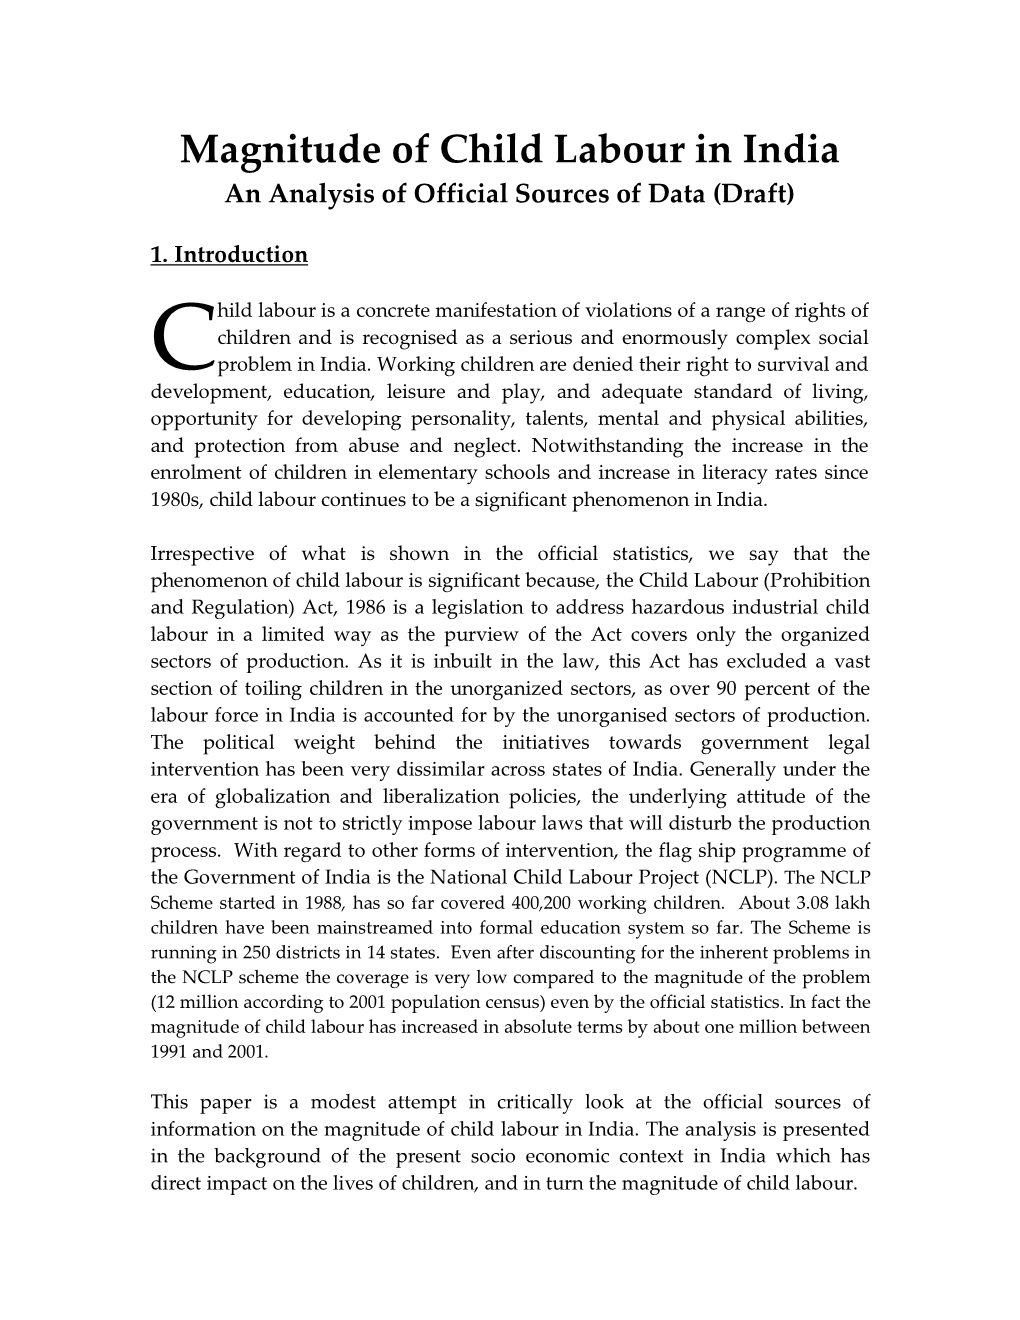 Magnitude of Child Labour in India an Analysis of Official Sources of Data (Draft)